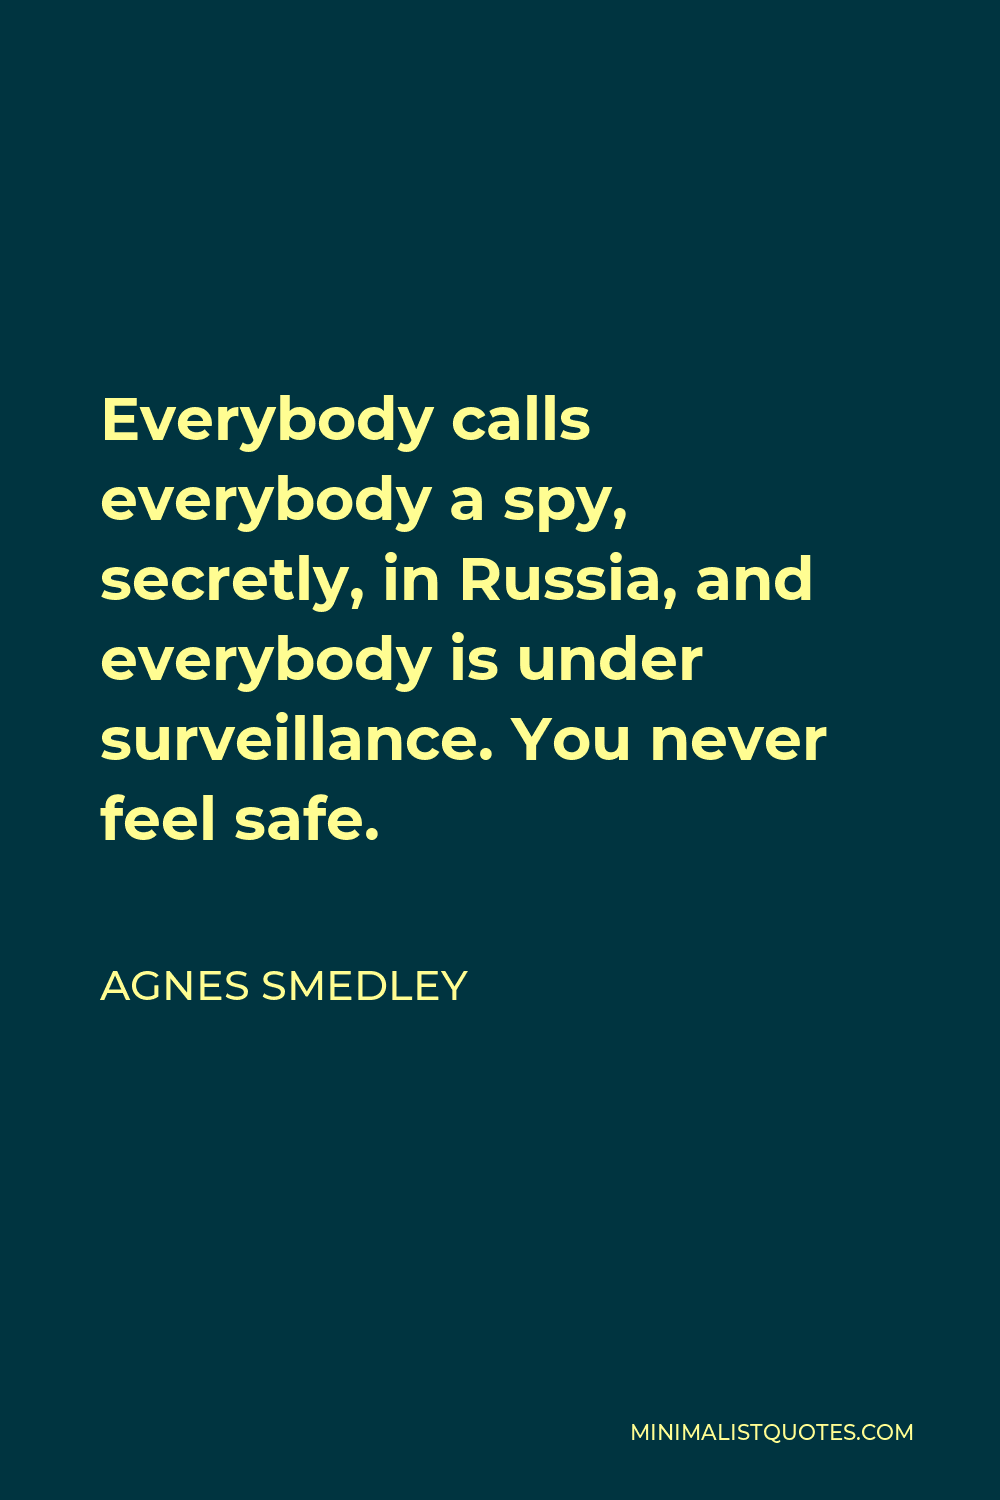 Agnes Smedley Quote - Everybody calls everybody a spy, secretly, in Russia, and everybody is under surveillance. You never feel safe.